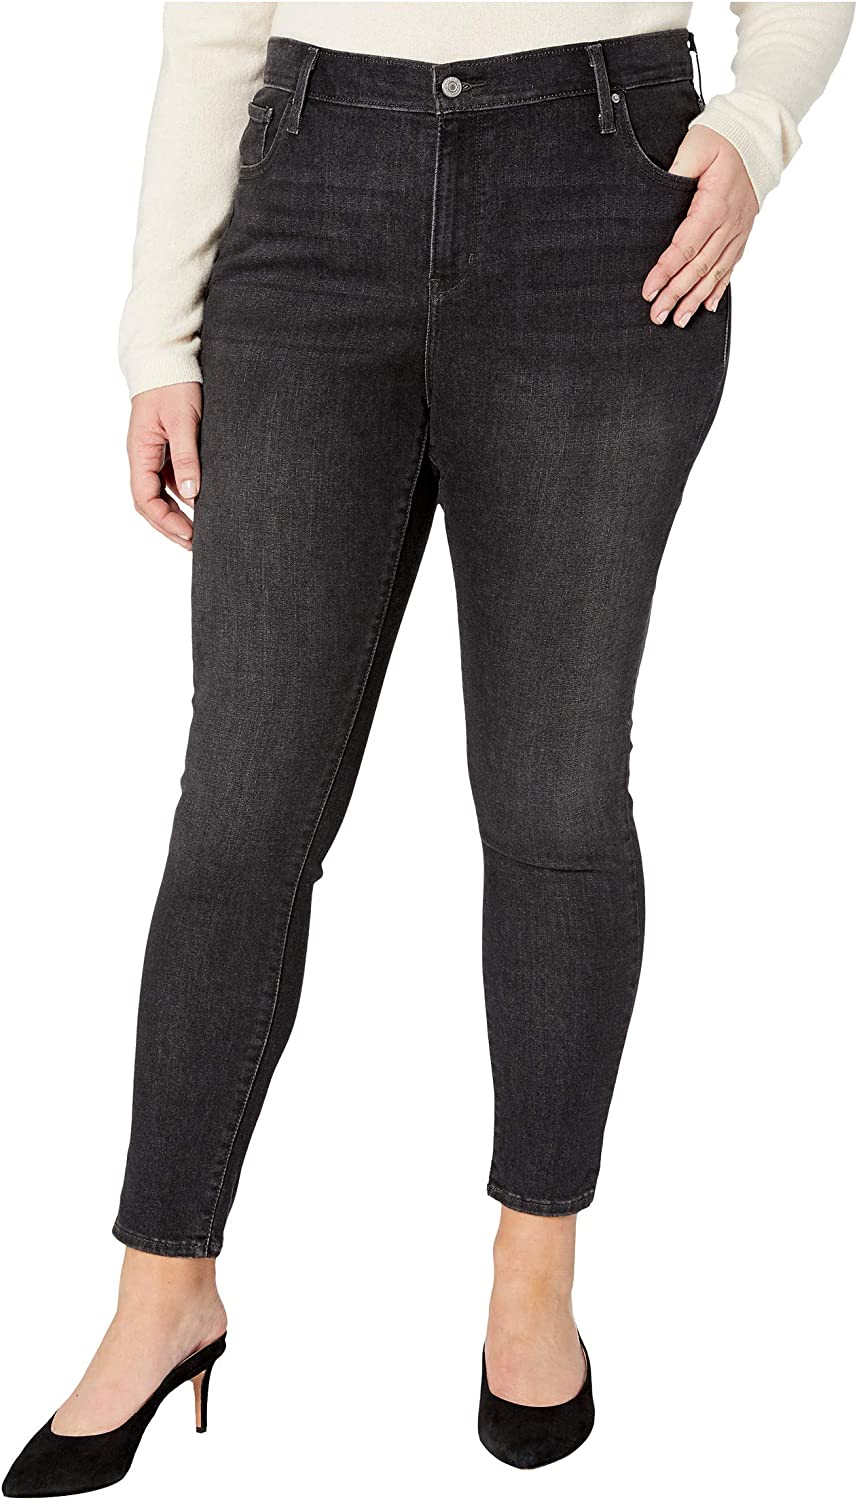 Levi's Womens Trendy Plus Size High Rise Skinny Jeans